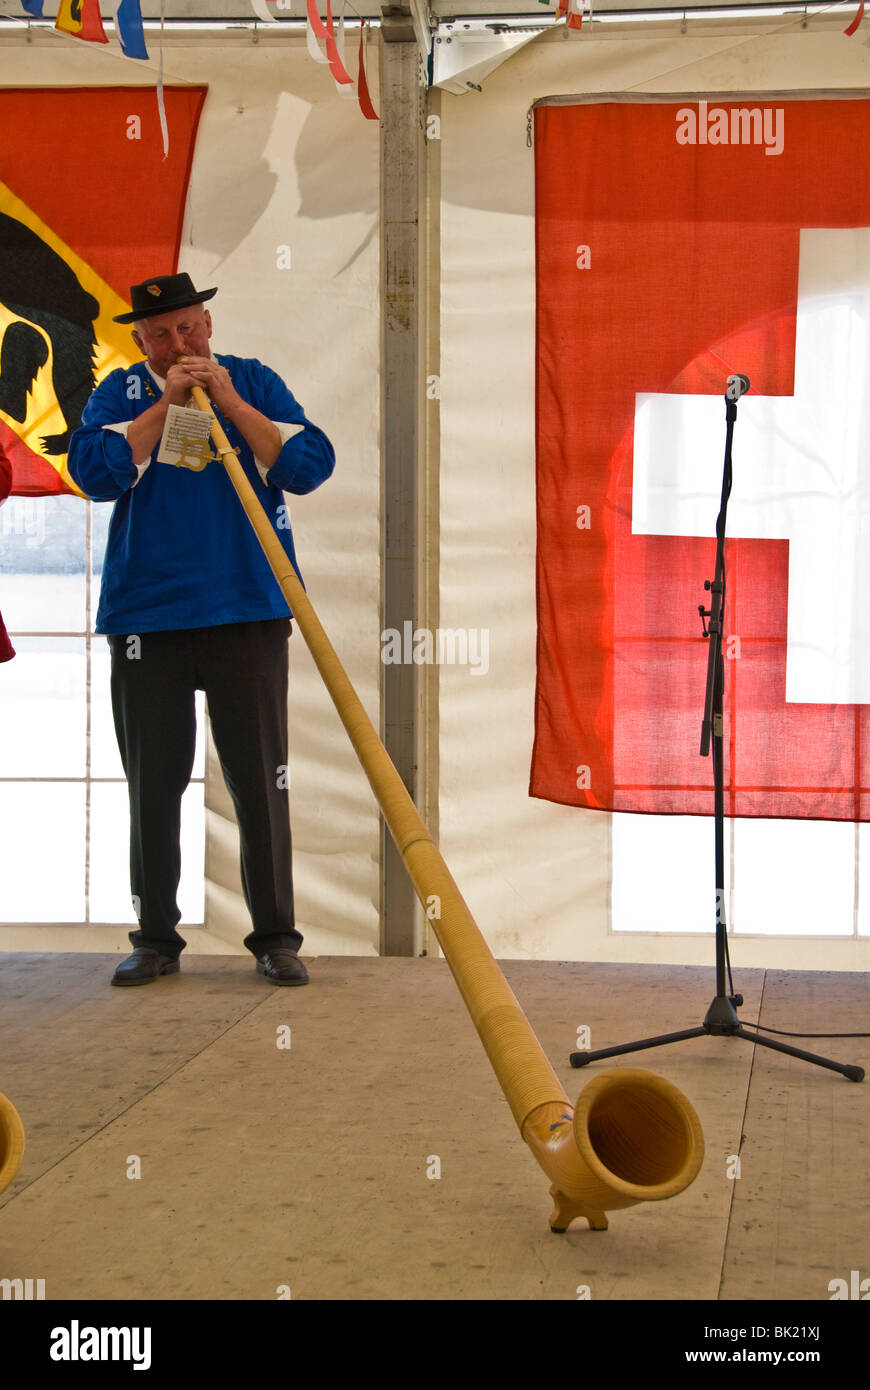 Man playing alphorn or alpenhorn or alpine horn at the Wengen Cheese Festival in Switzerland, the alphorn is a is a labrophone Stock Photo